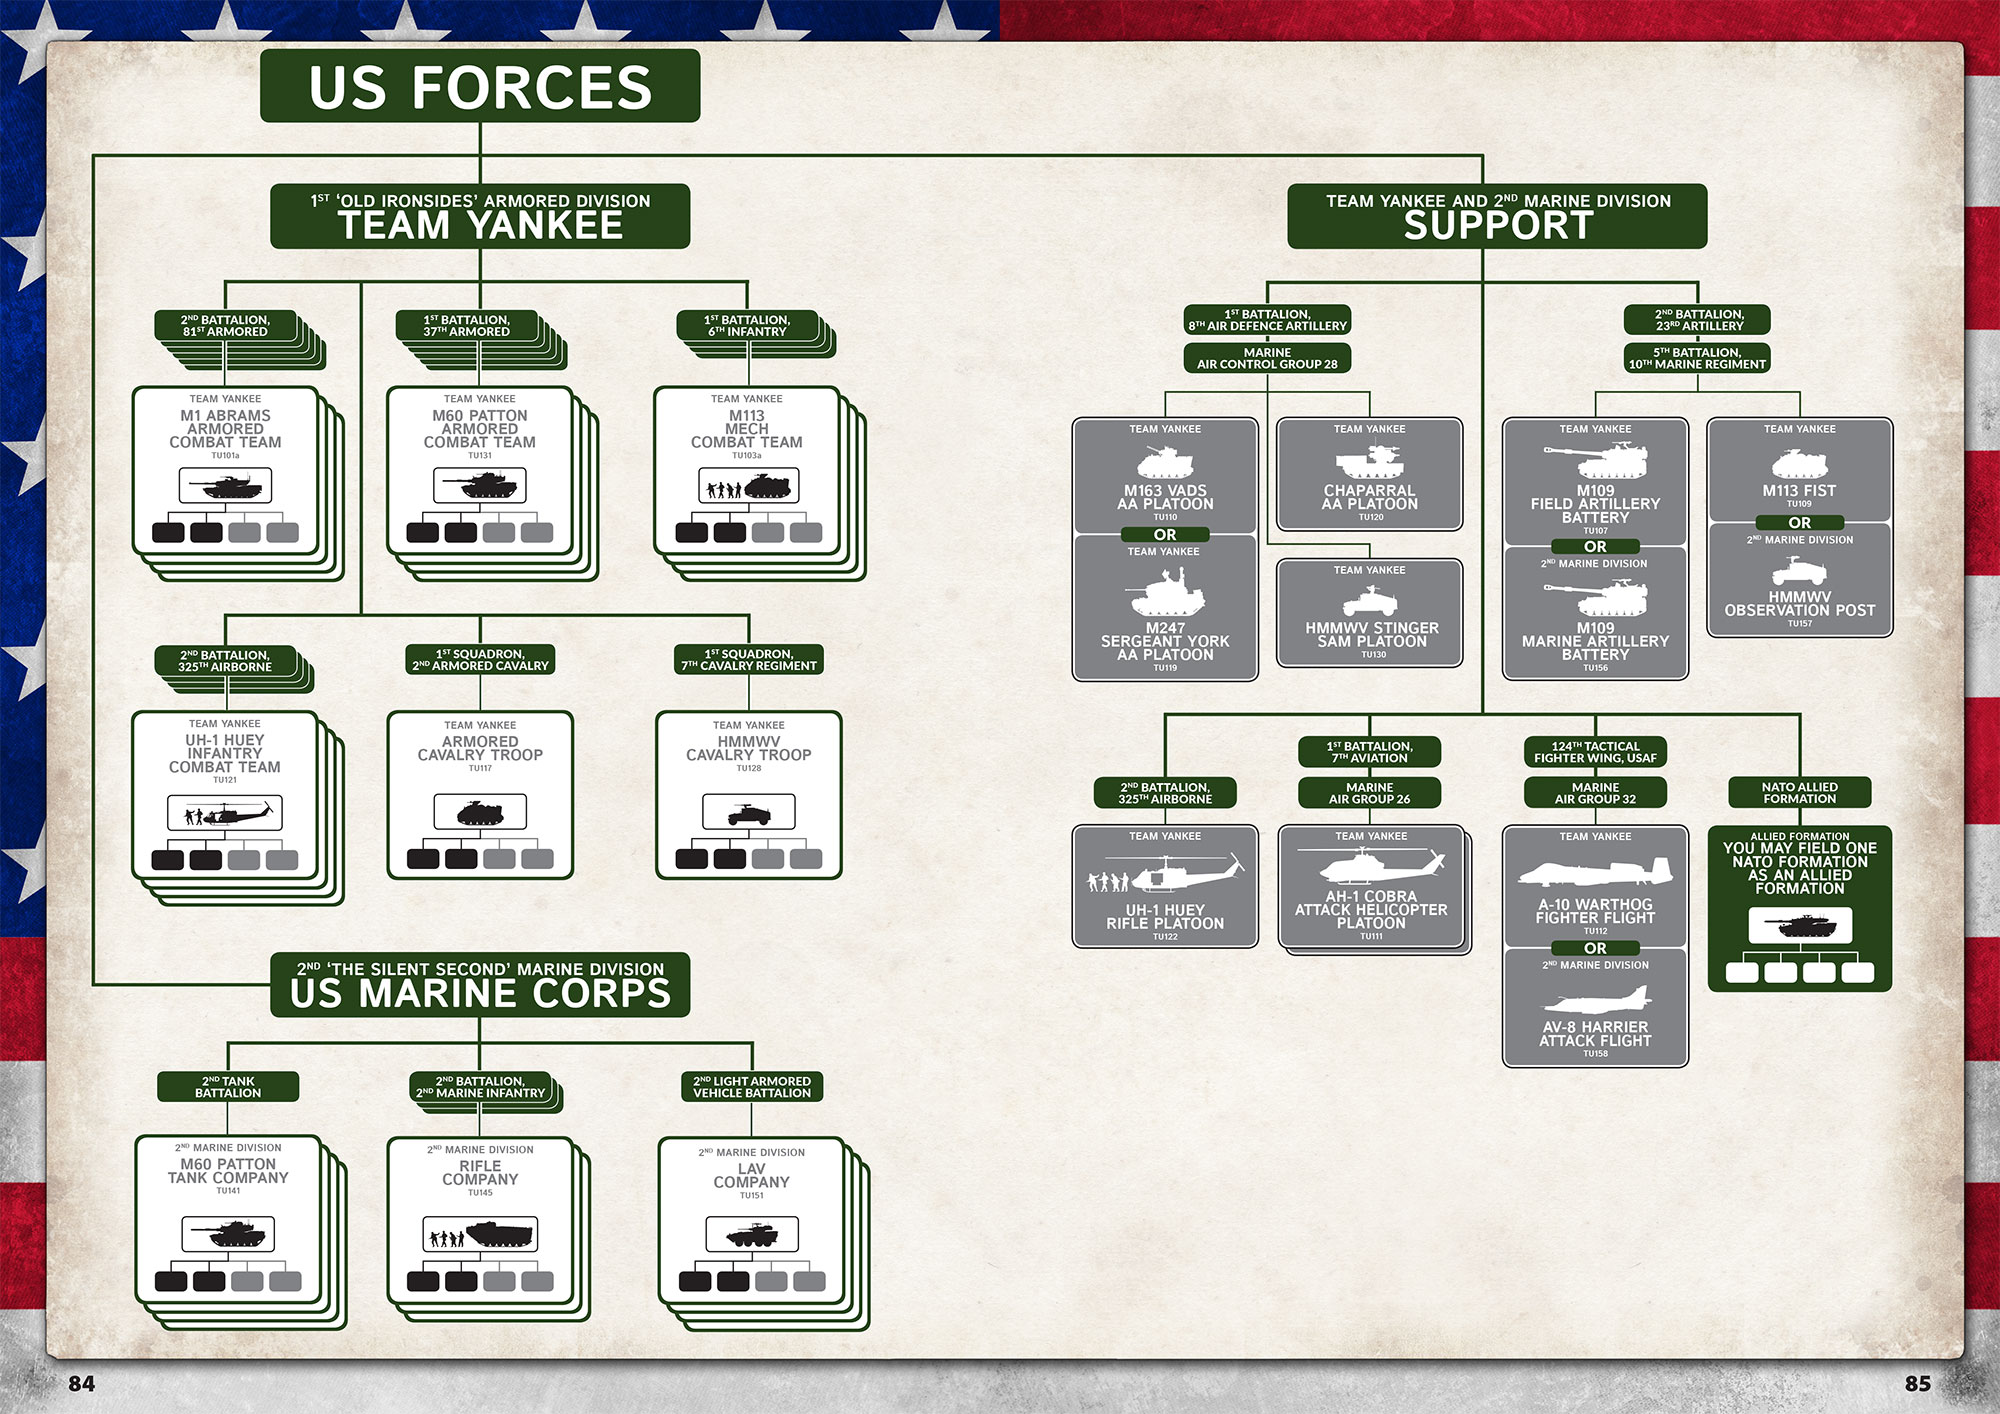 Stripes - US Forces in World War III